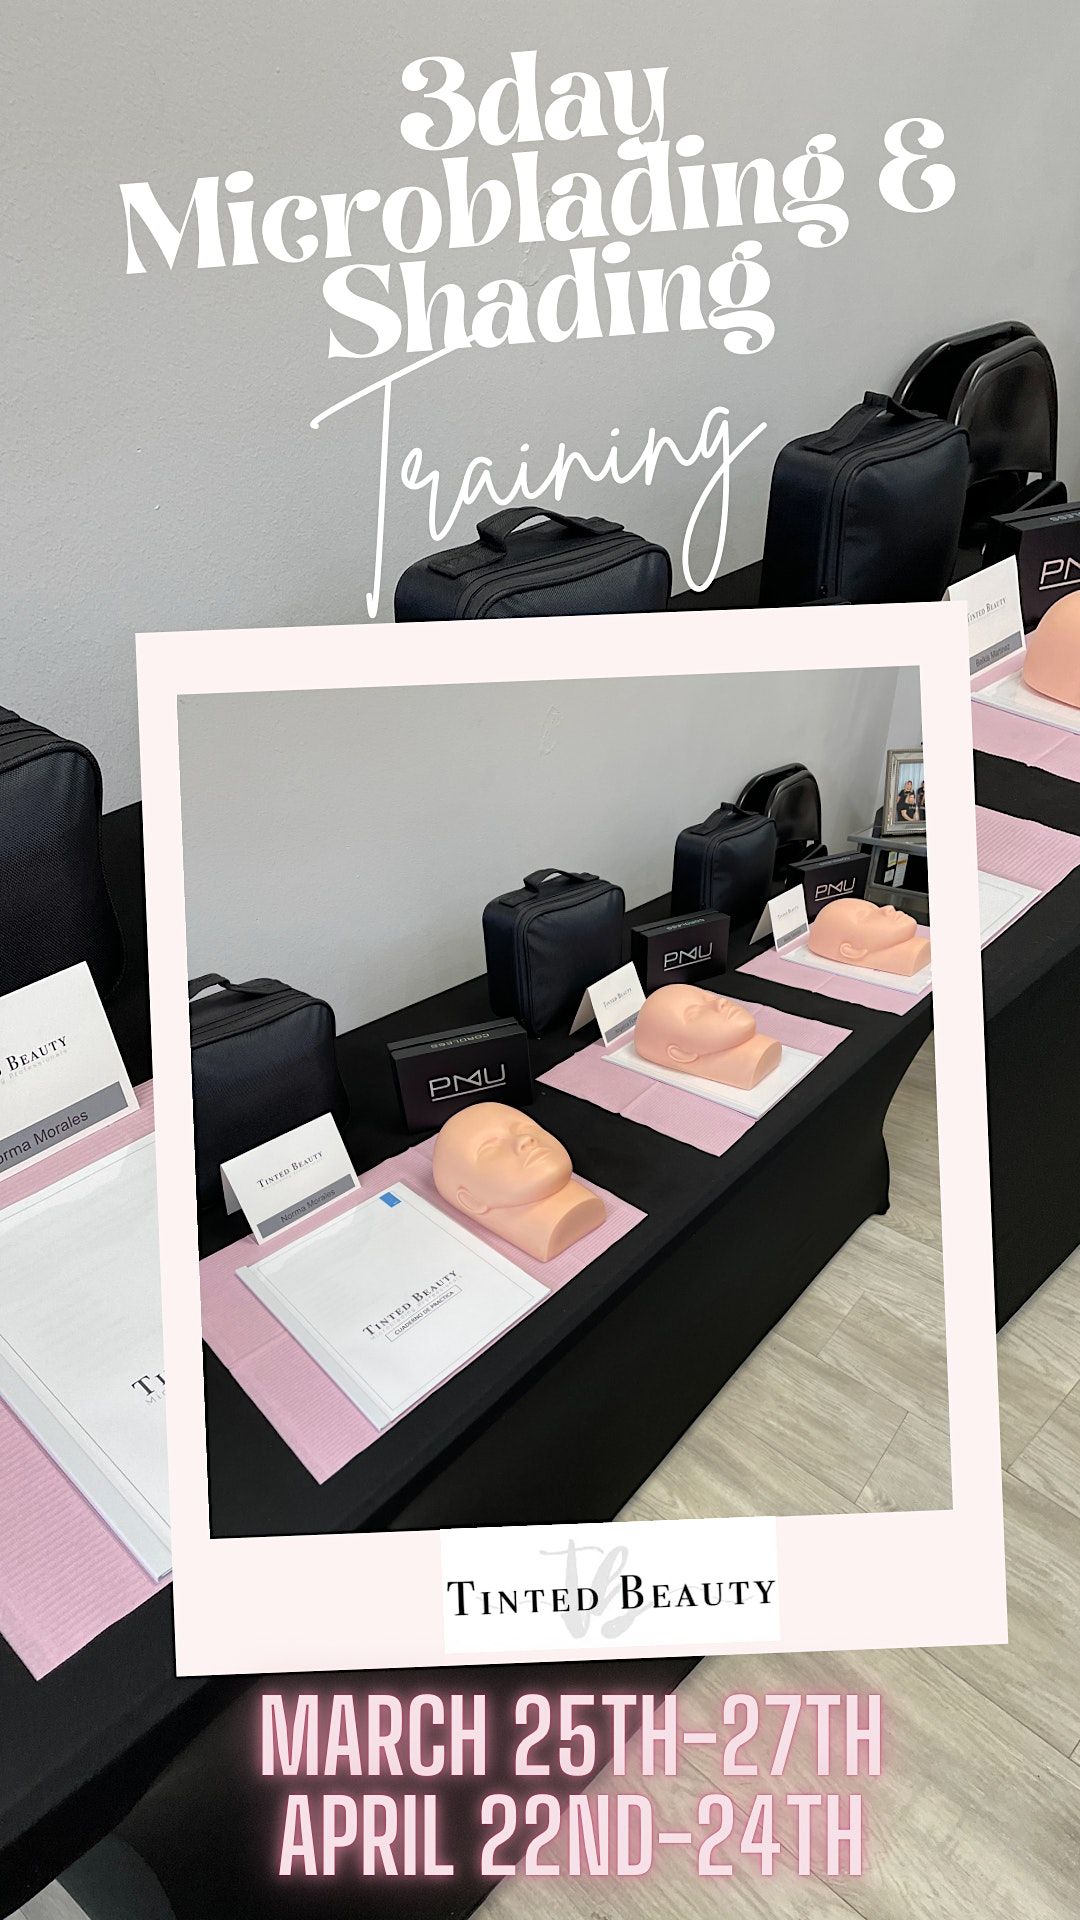 Your choice training: Microblading, Ombre, and Combo Brow Course